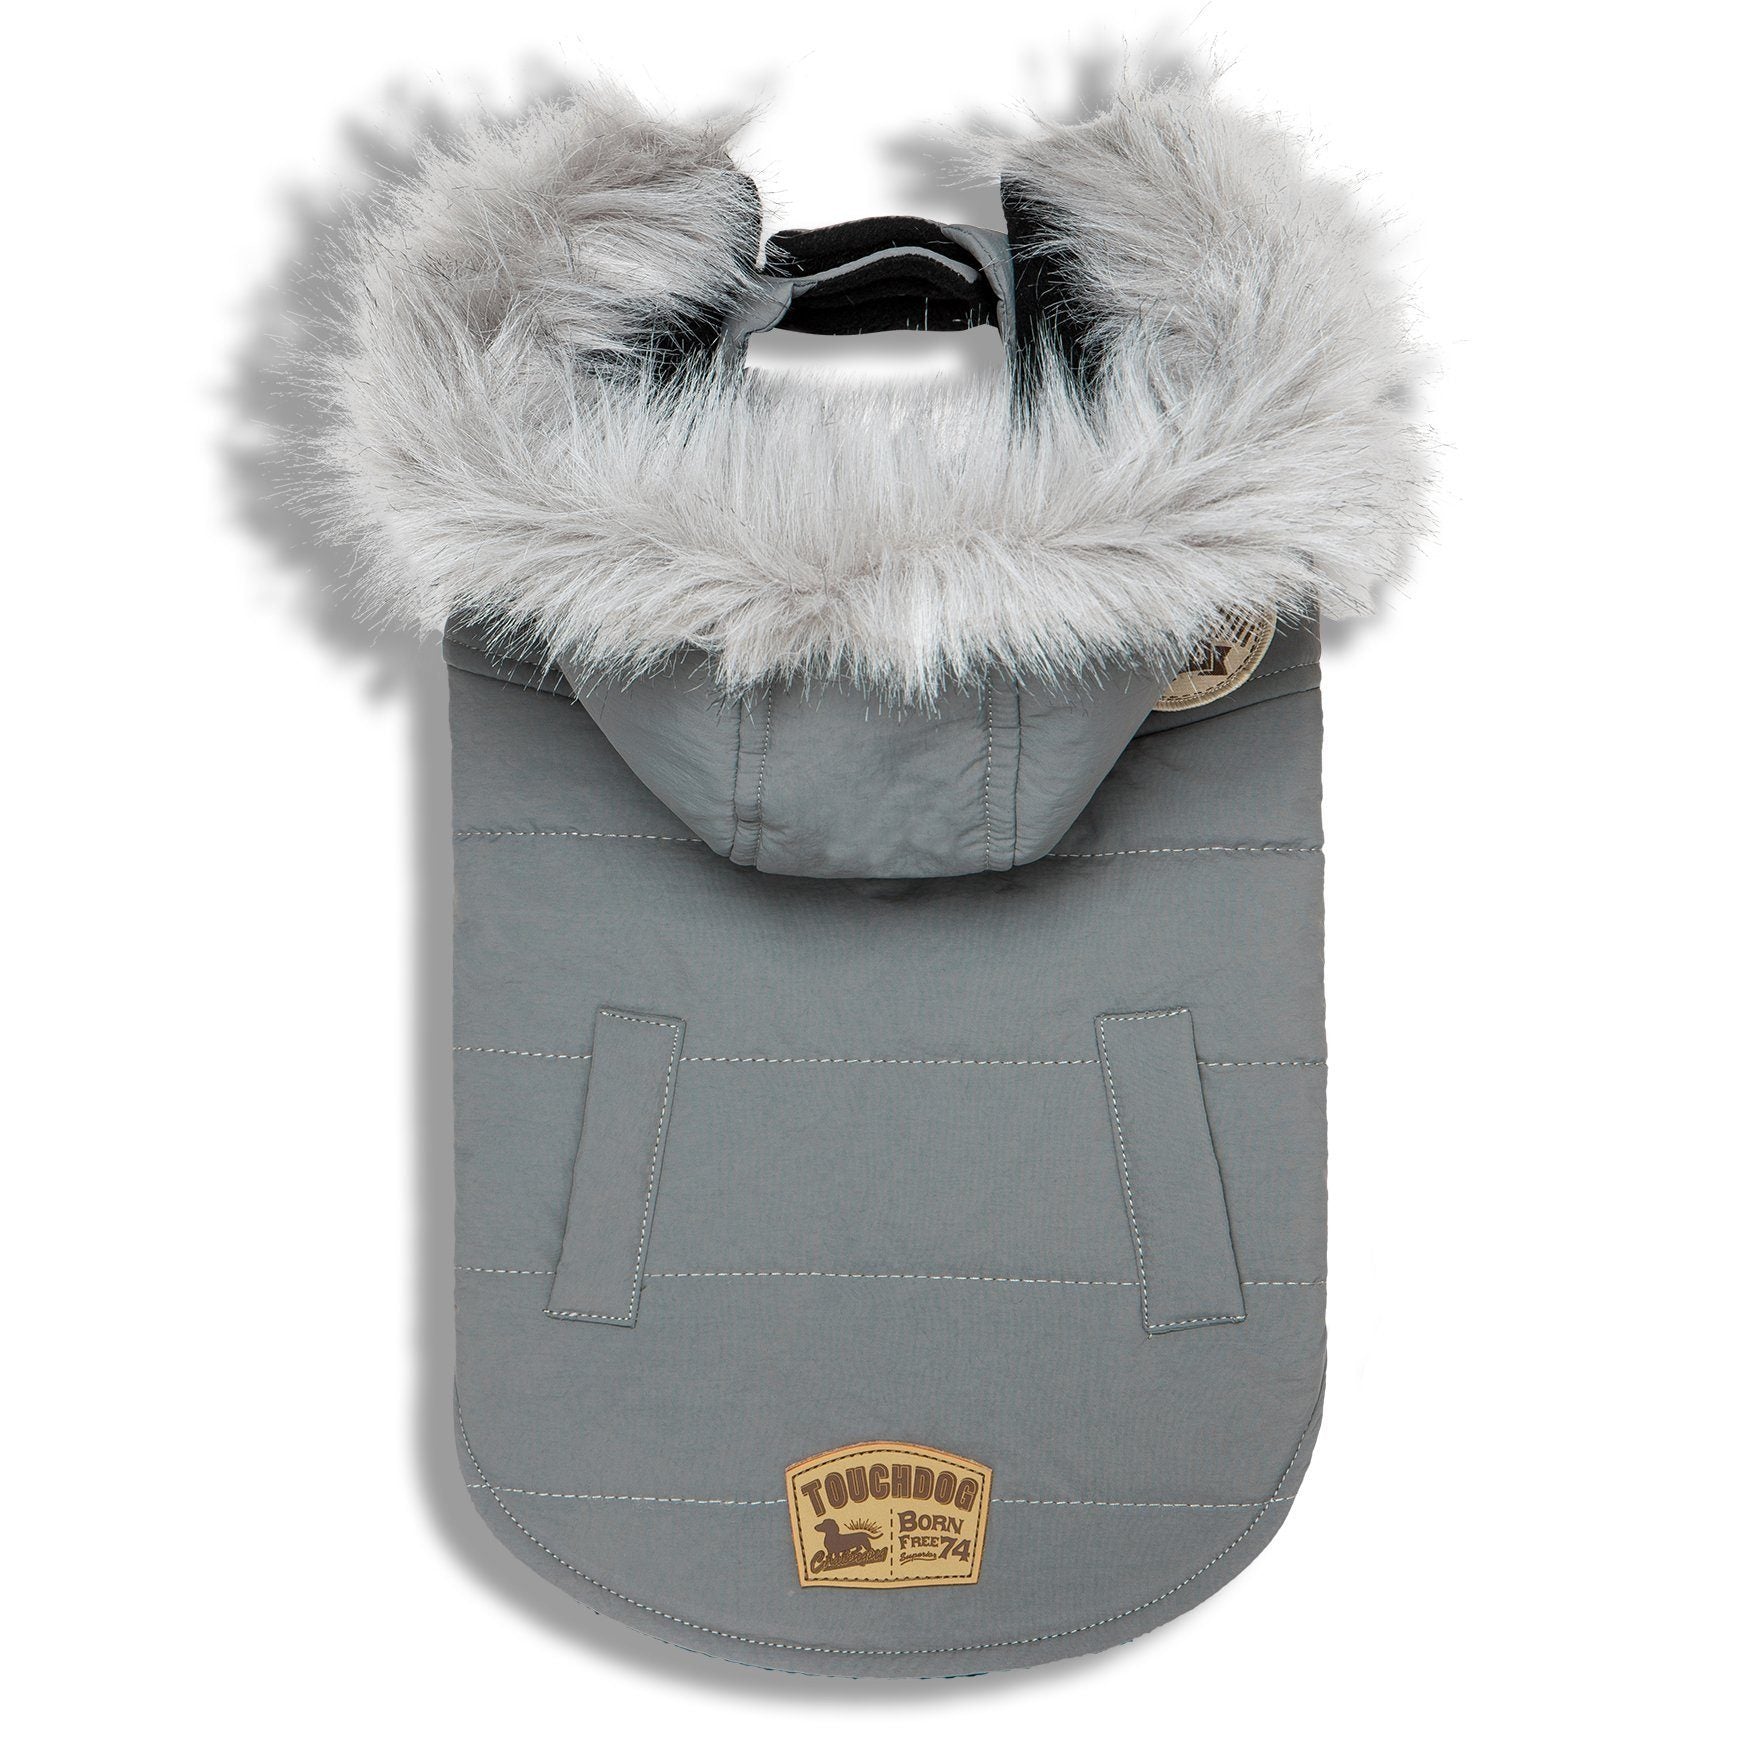 Touchdog 'Eskimo-Swag' Duck-Down Insulated Winter Dog Coat Parka X-Small Gray